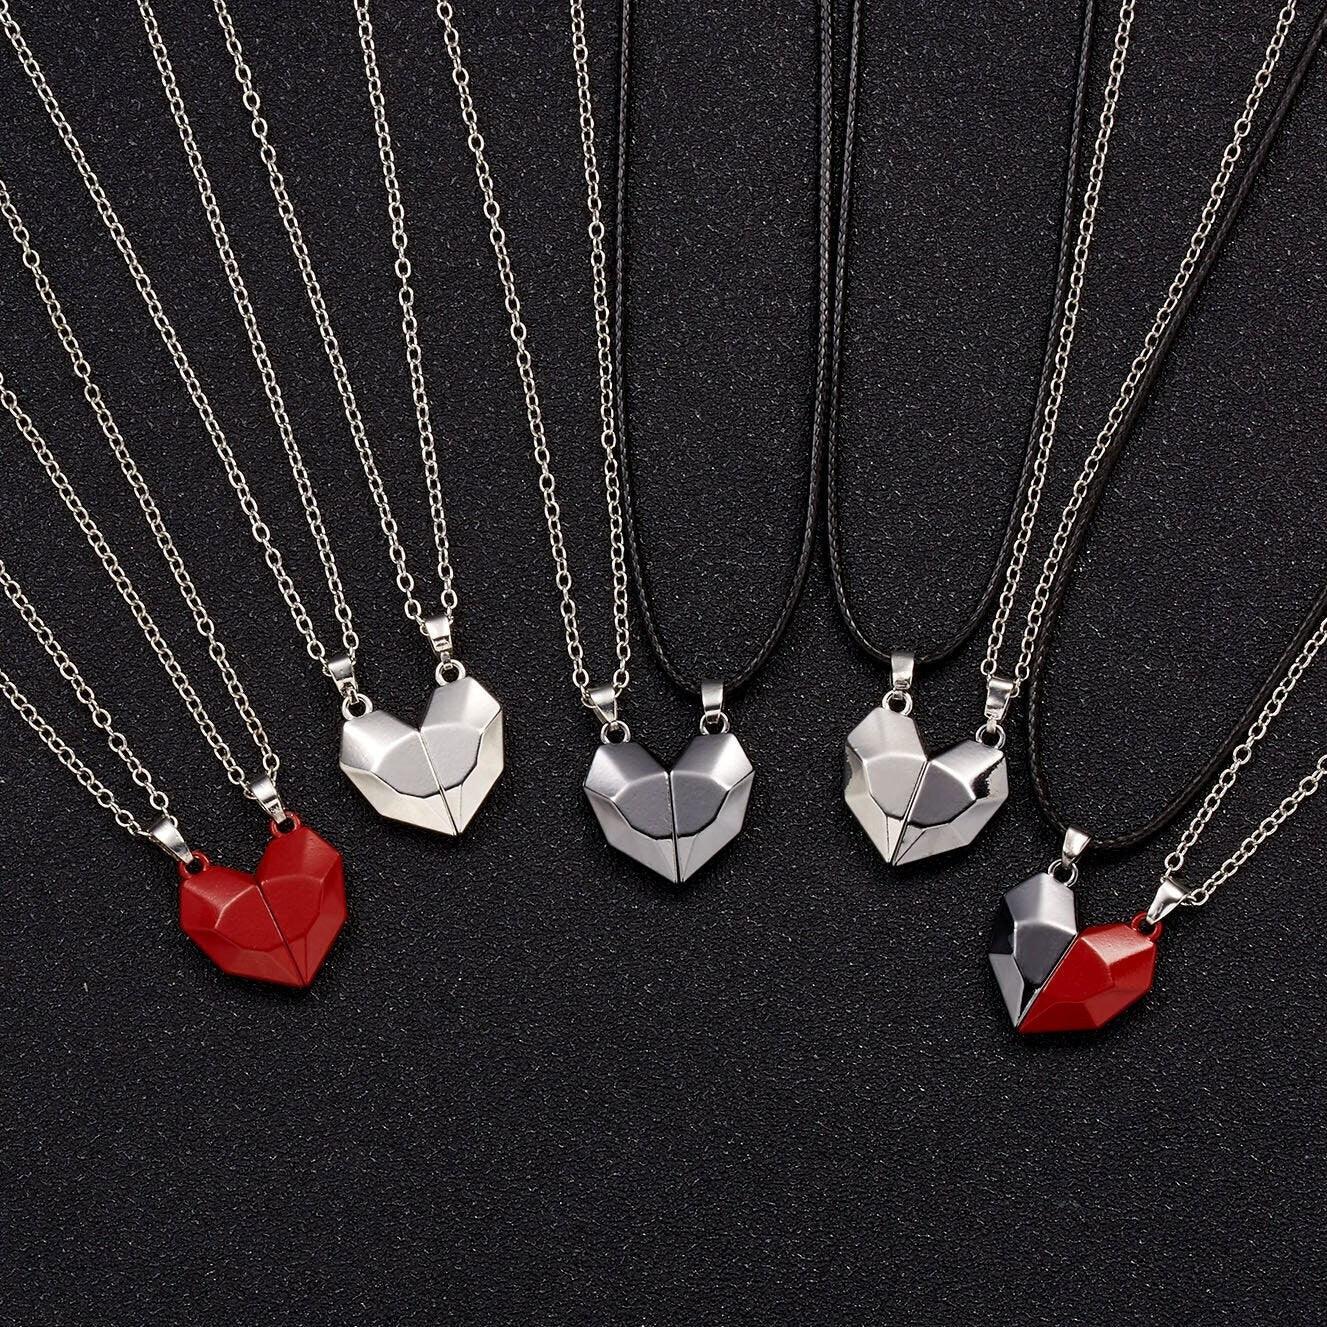 Magnetic Necklace for Couples Matching Couples Things Necklaces for